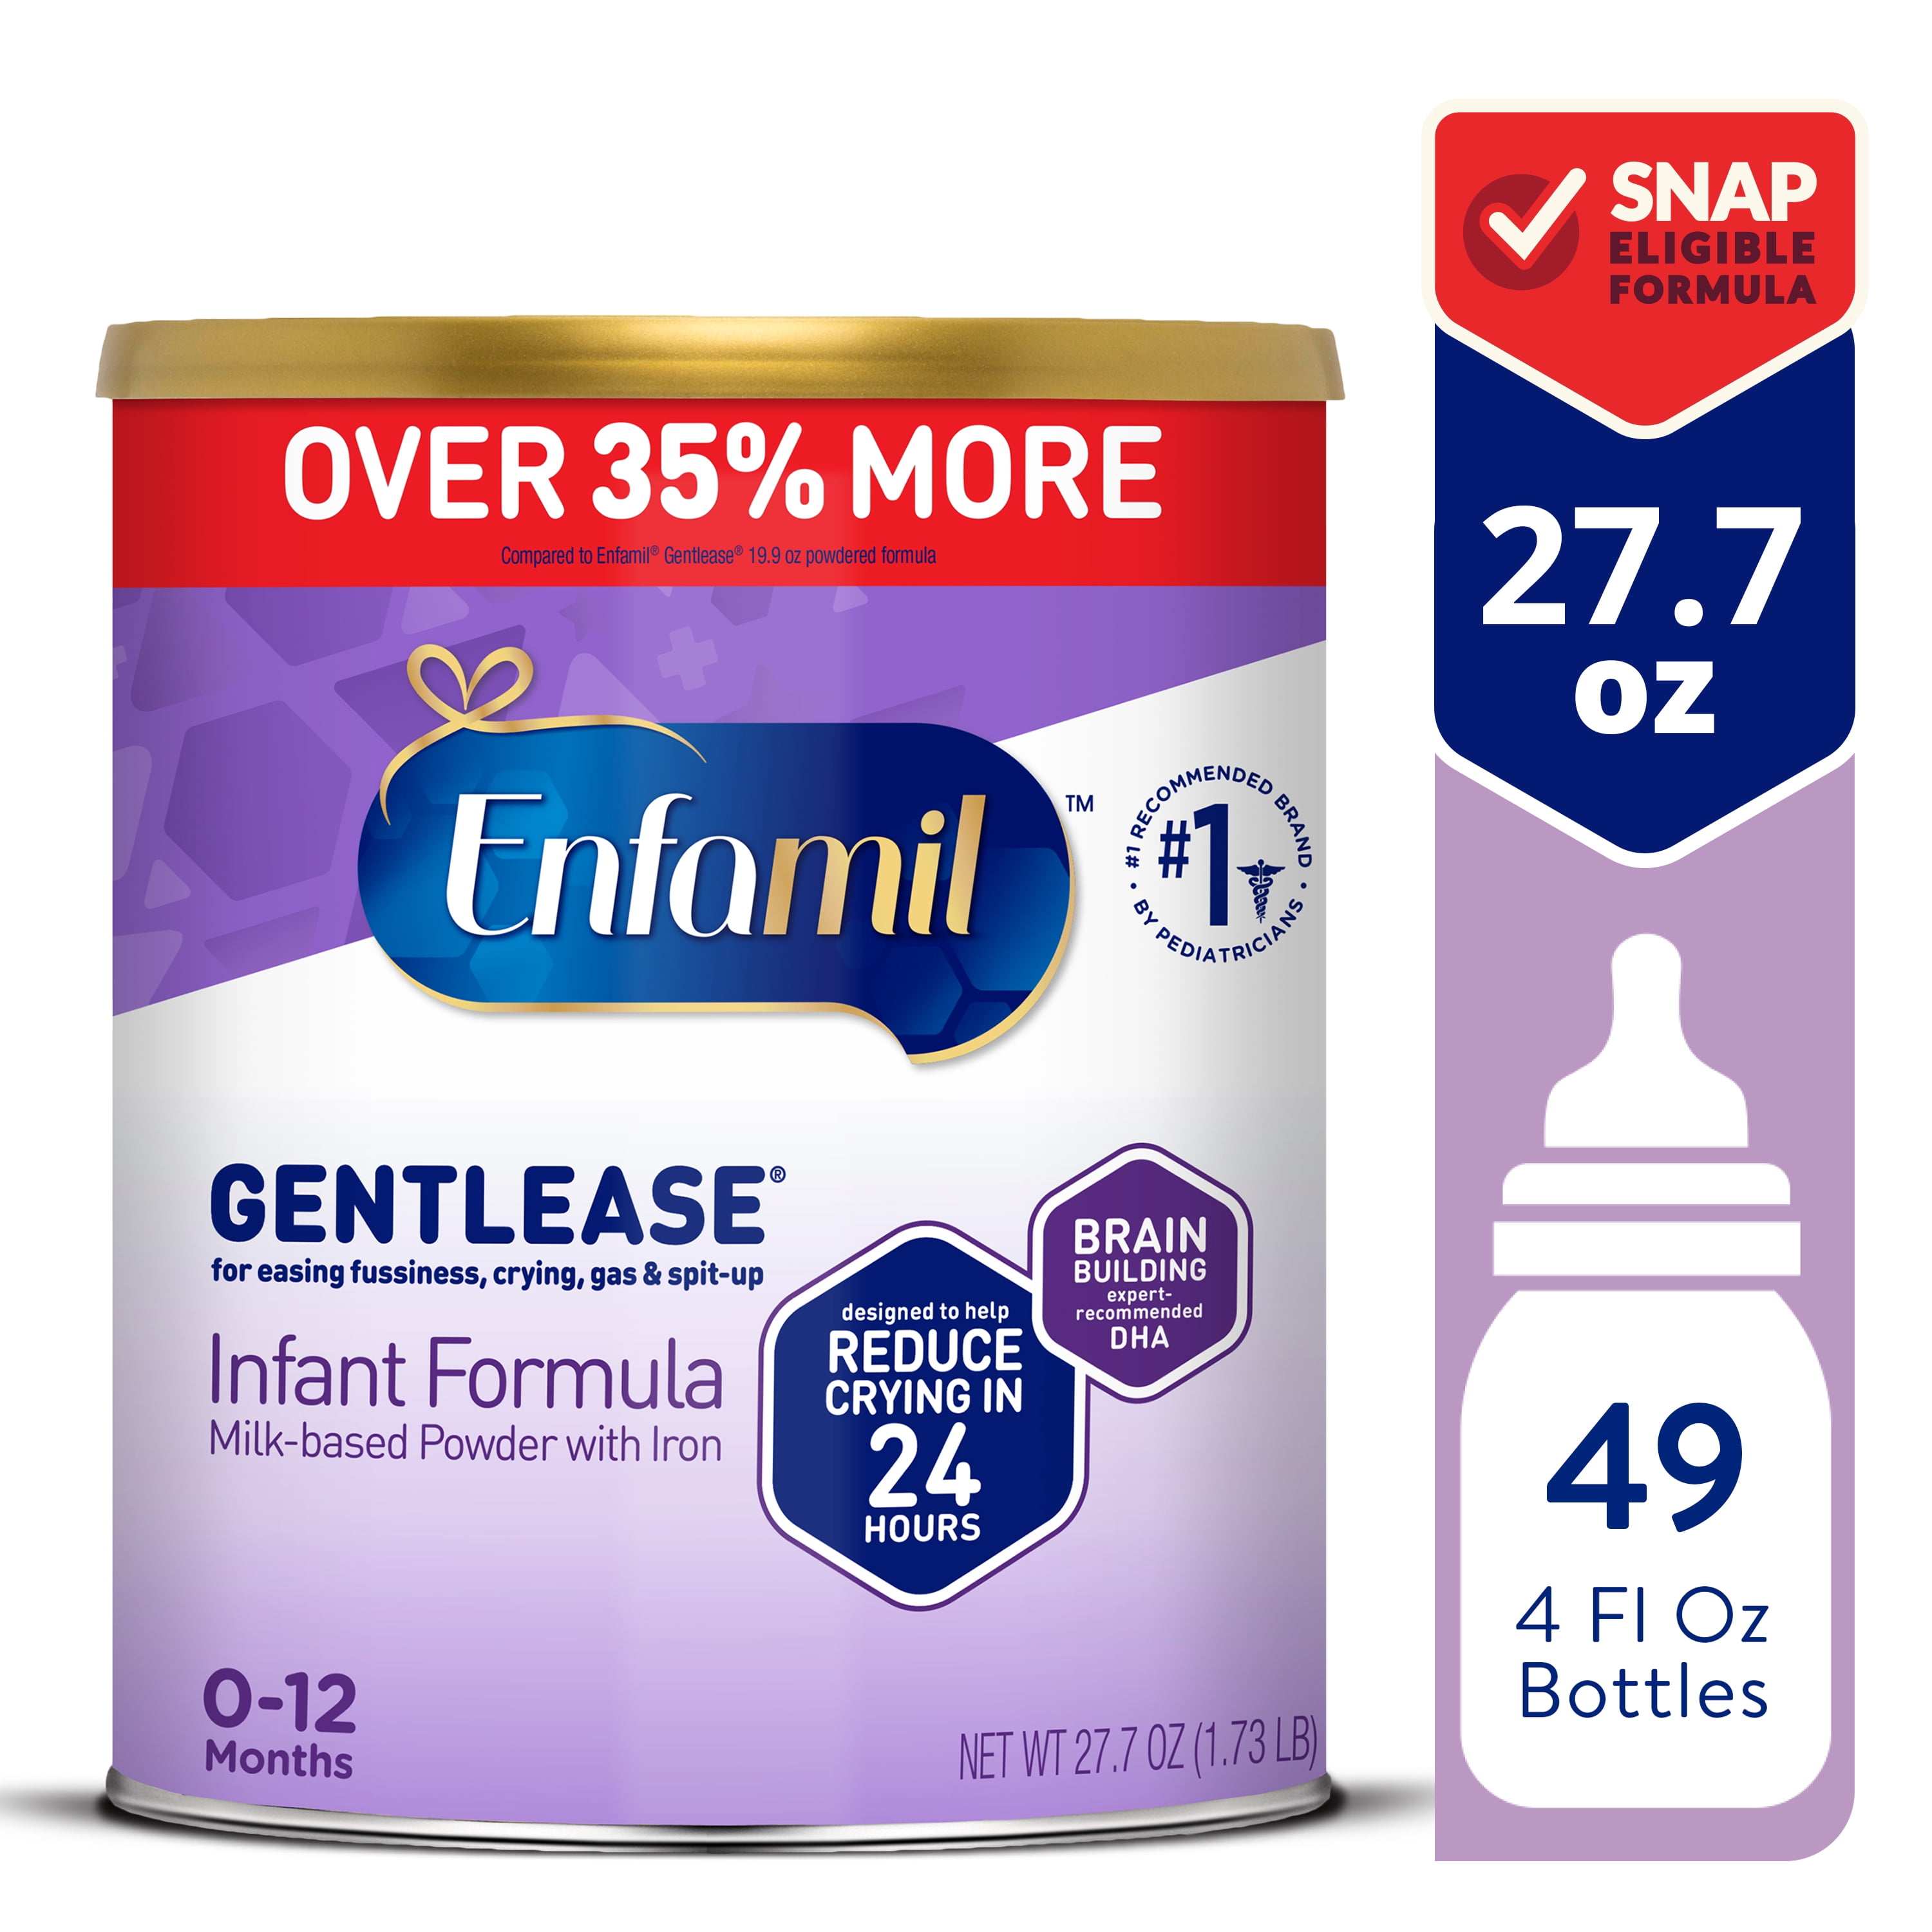 Enfamil Gentlease Baby Formula, Reduces Fussiness, Gas, Crying and Spit-up in 24 hours, DHA & Choline to support Brain development, Powder Can, 27.7 Oz